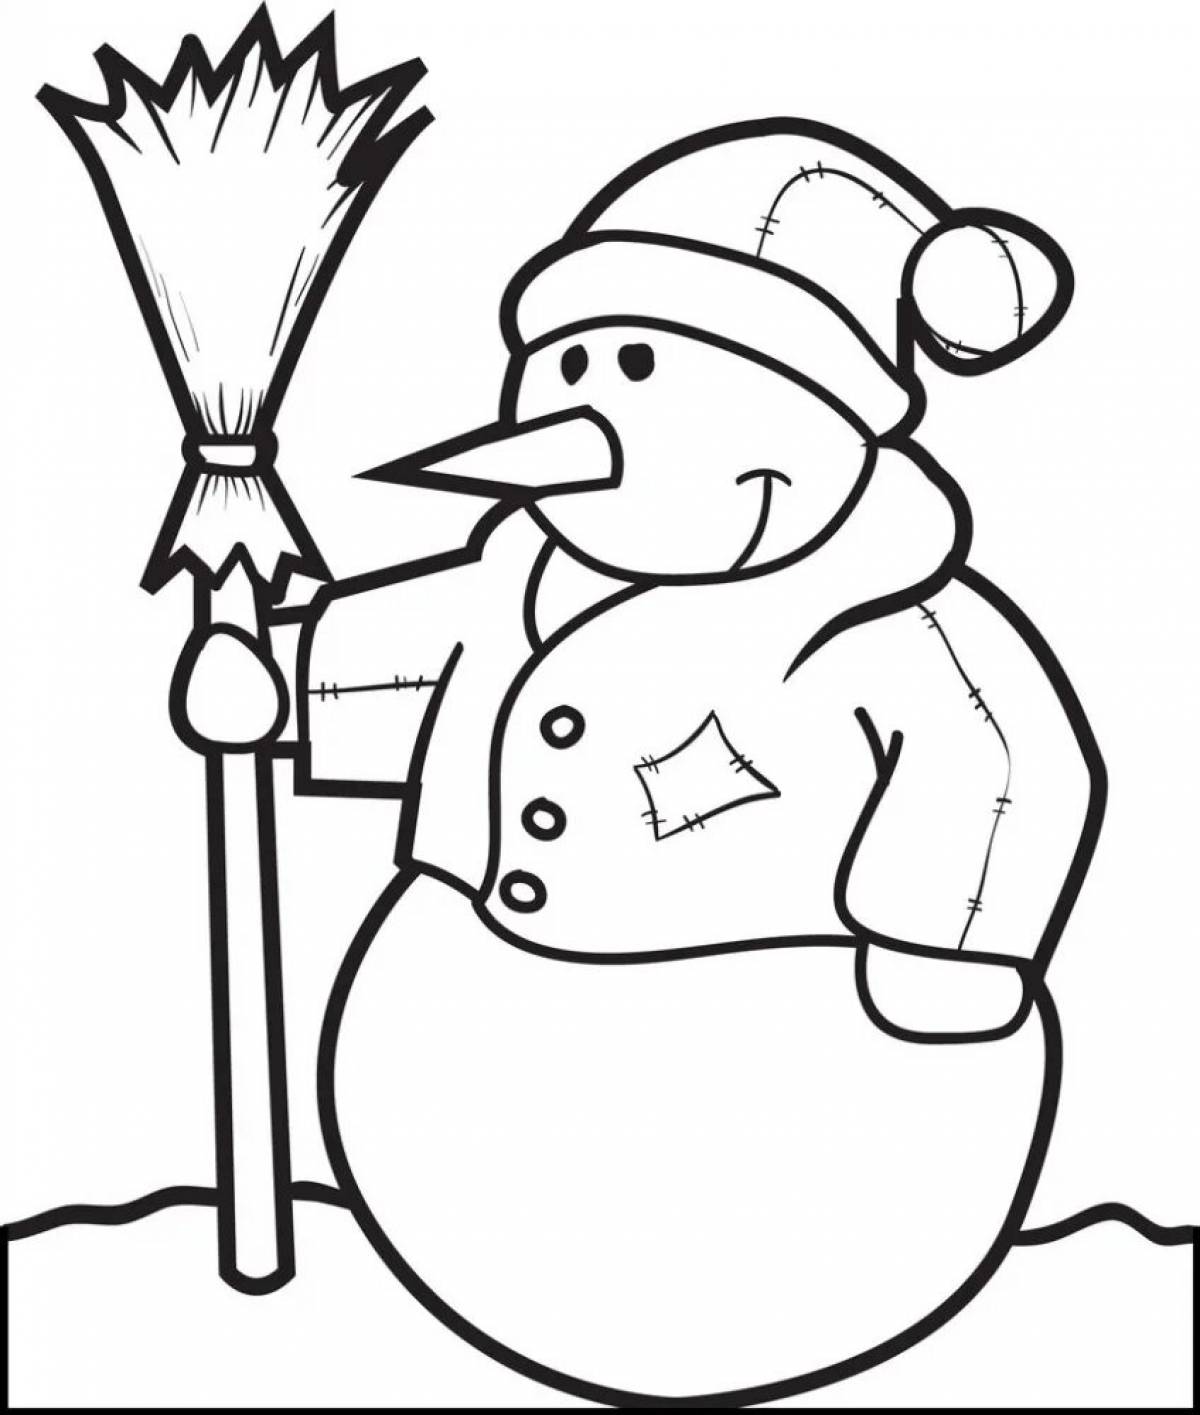 Snowman with broom #2